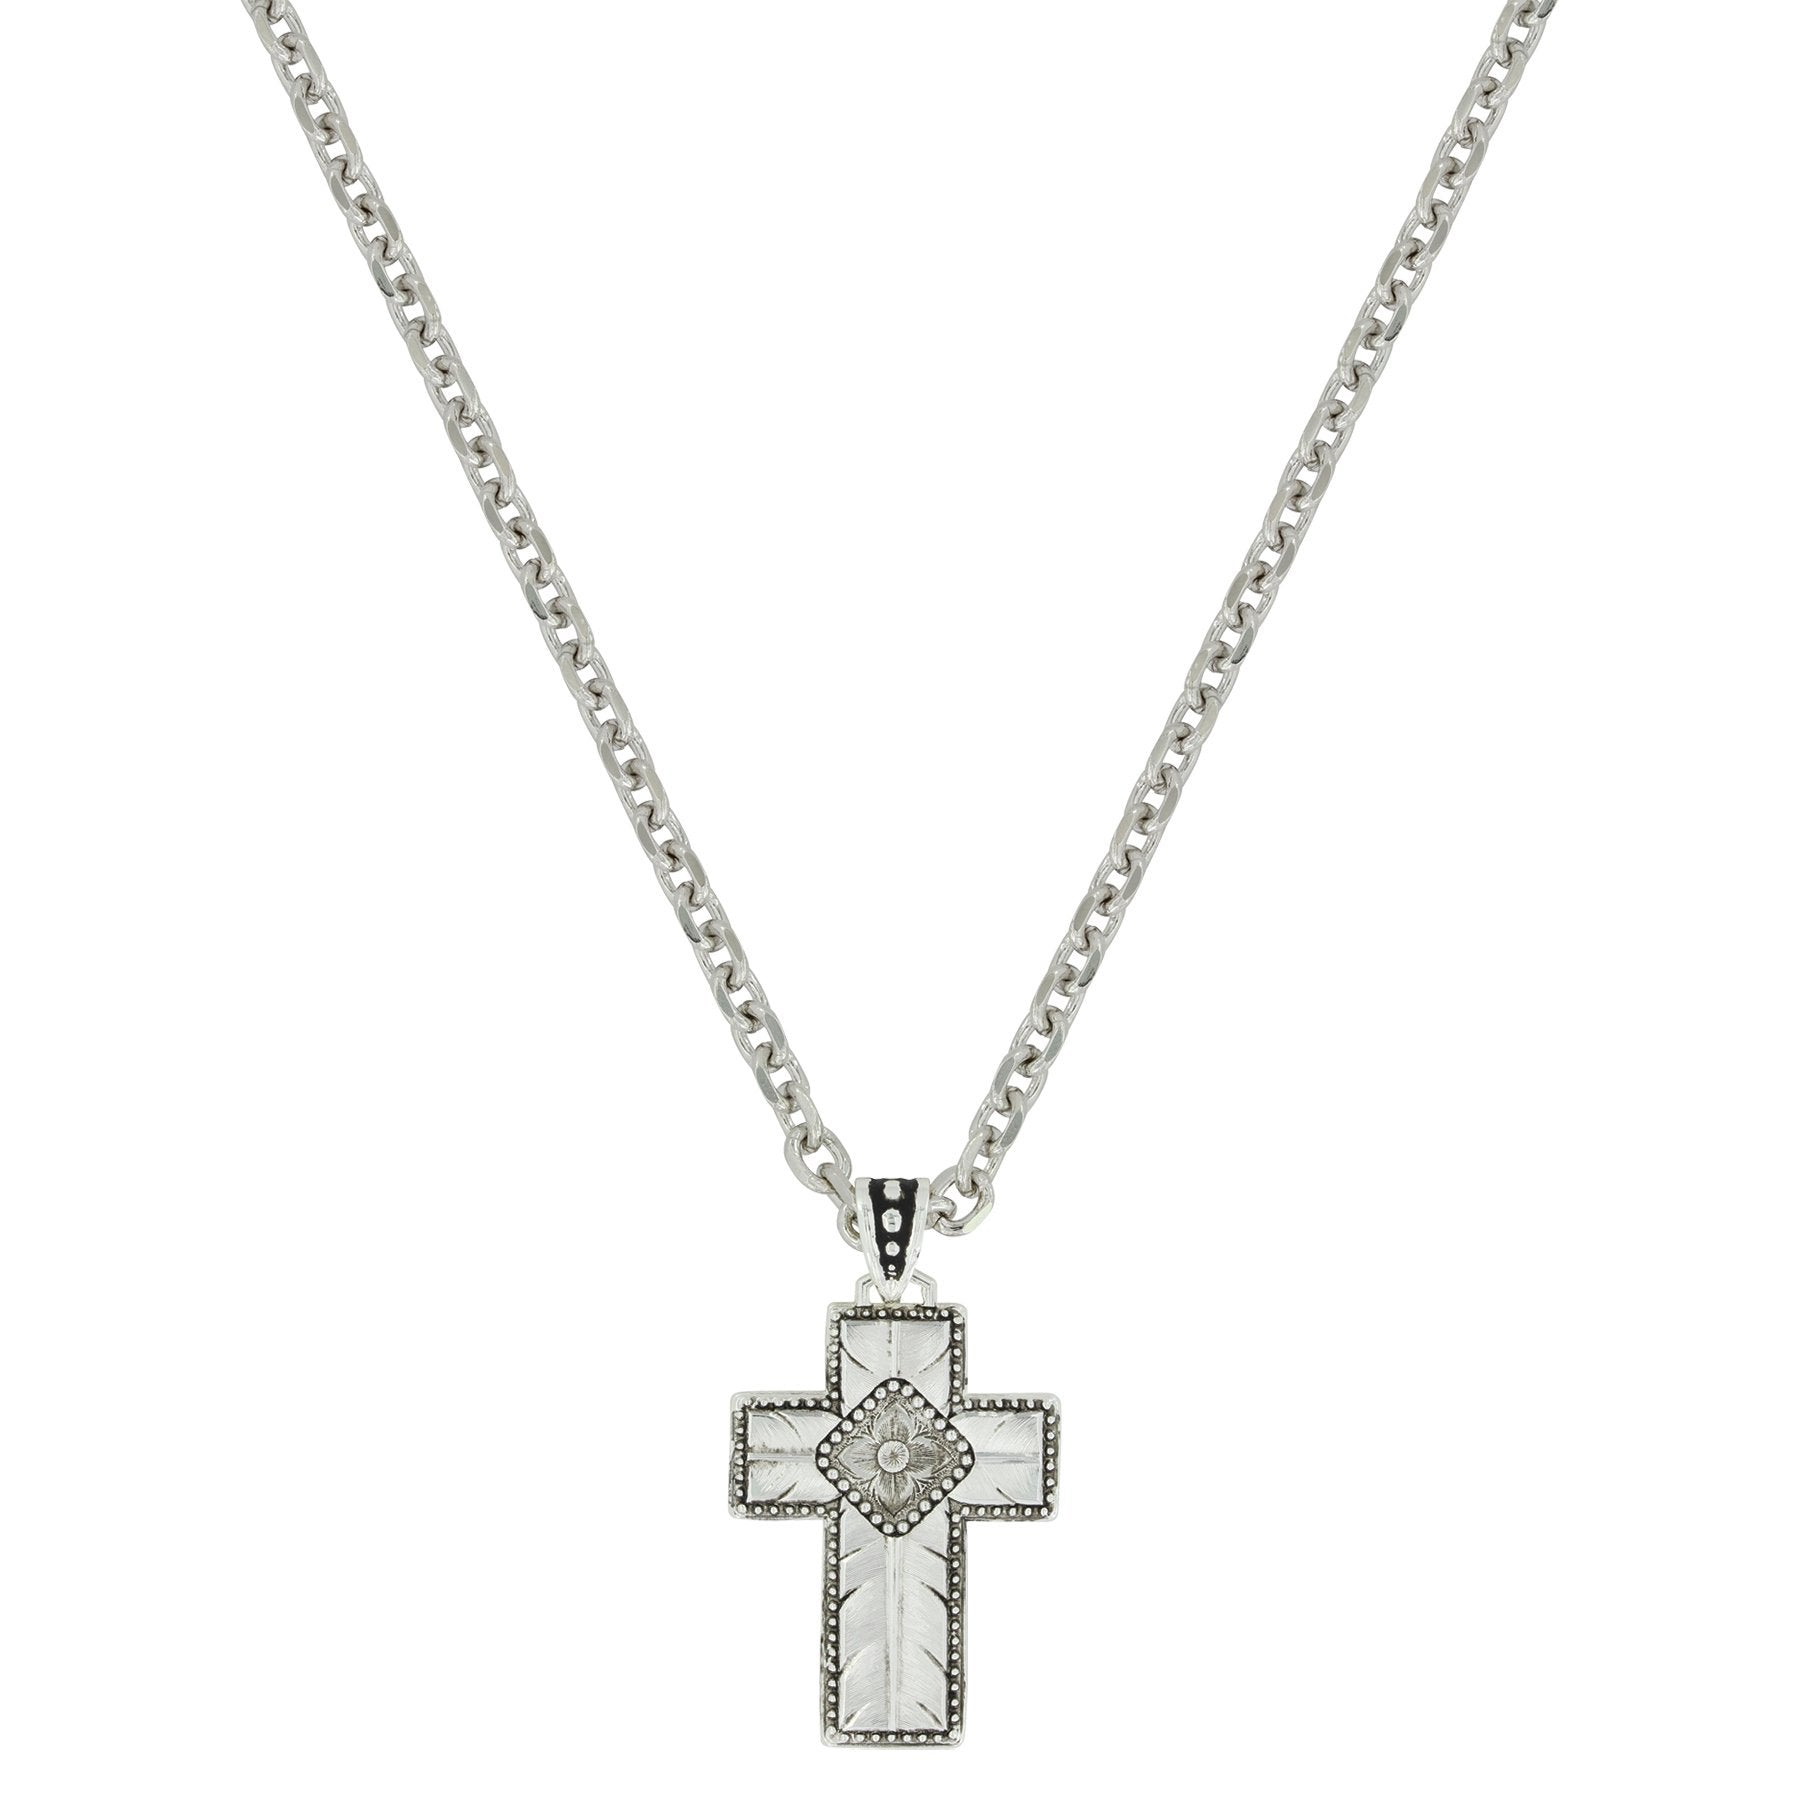 WIDE CROSS NECKLACE 22" CHAIN